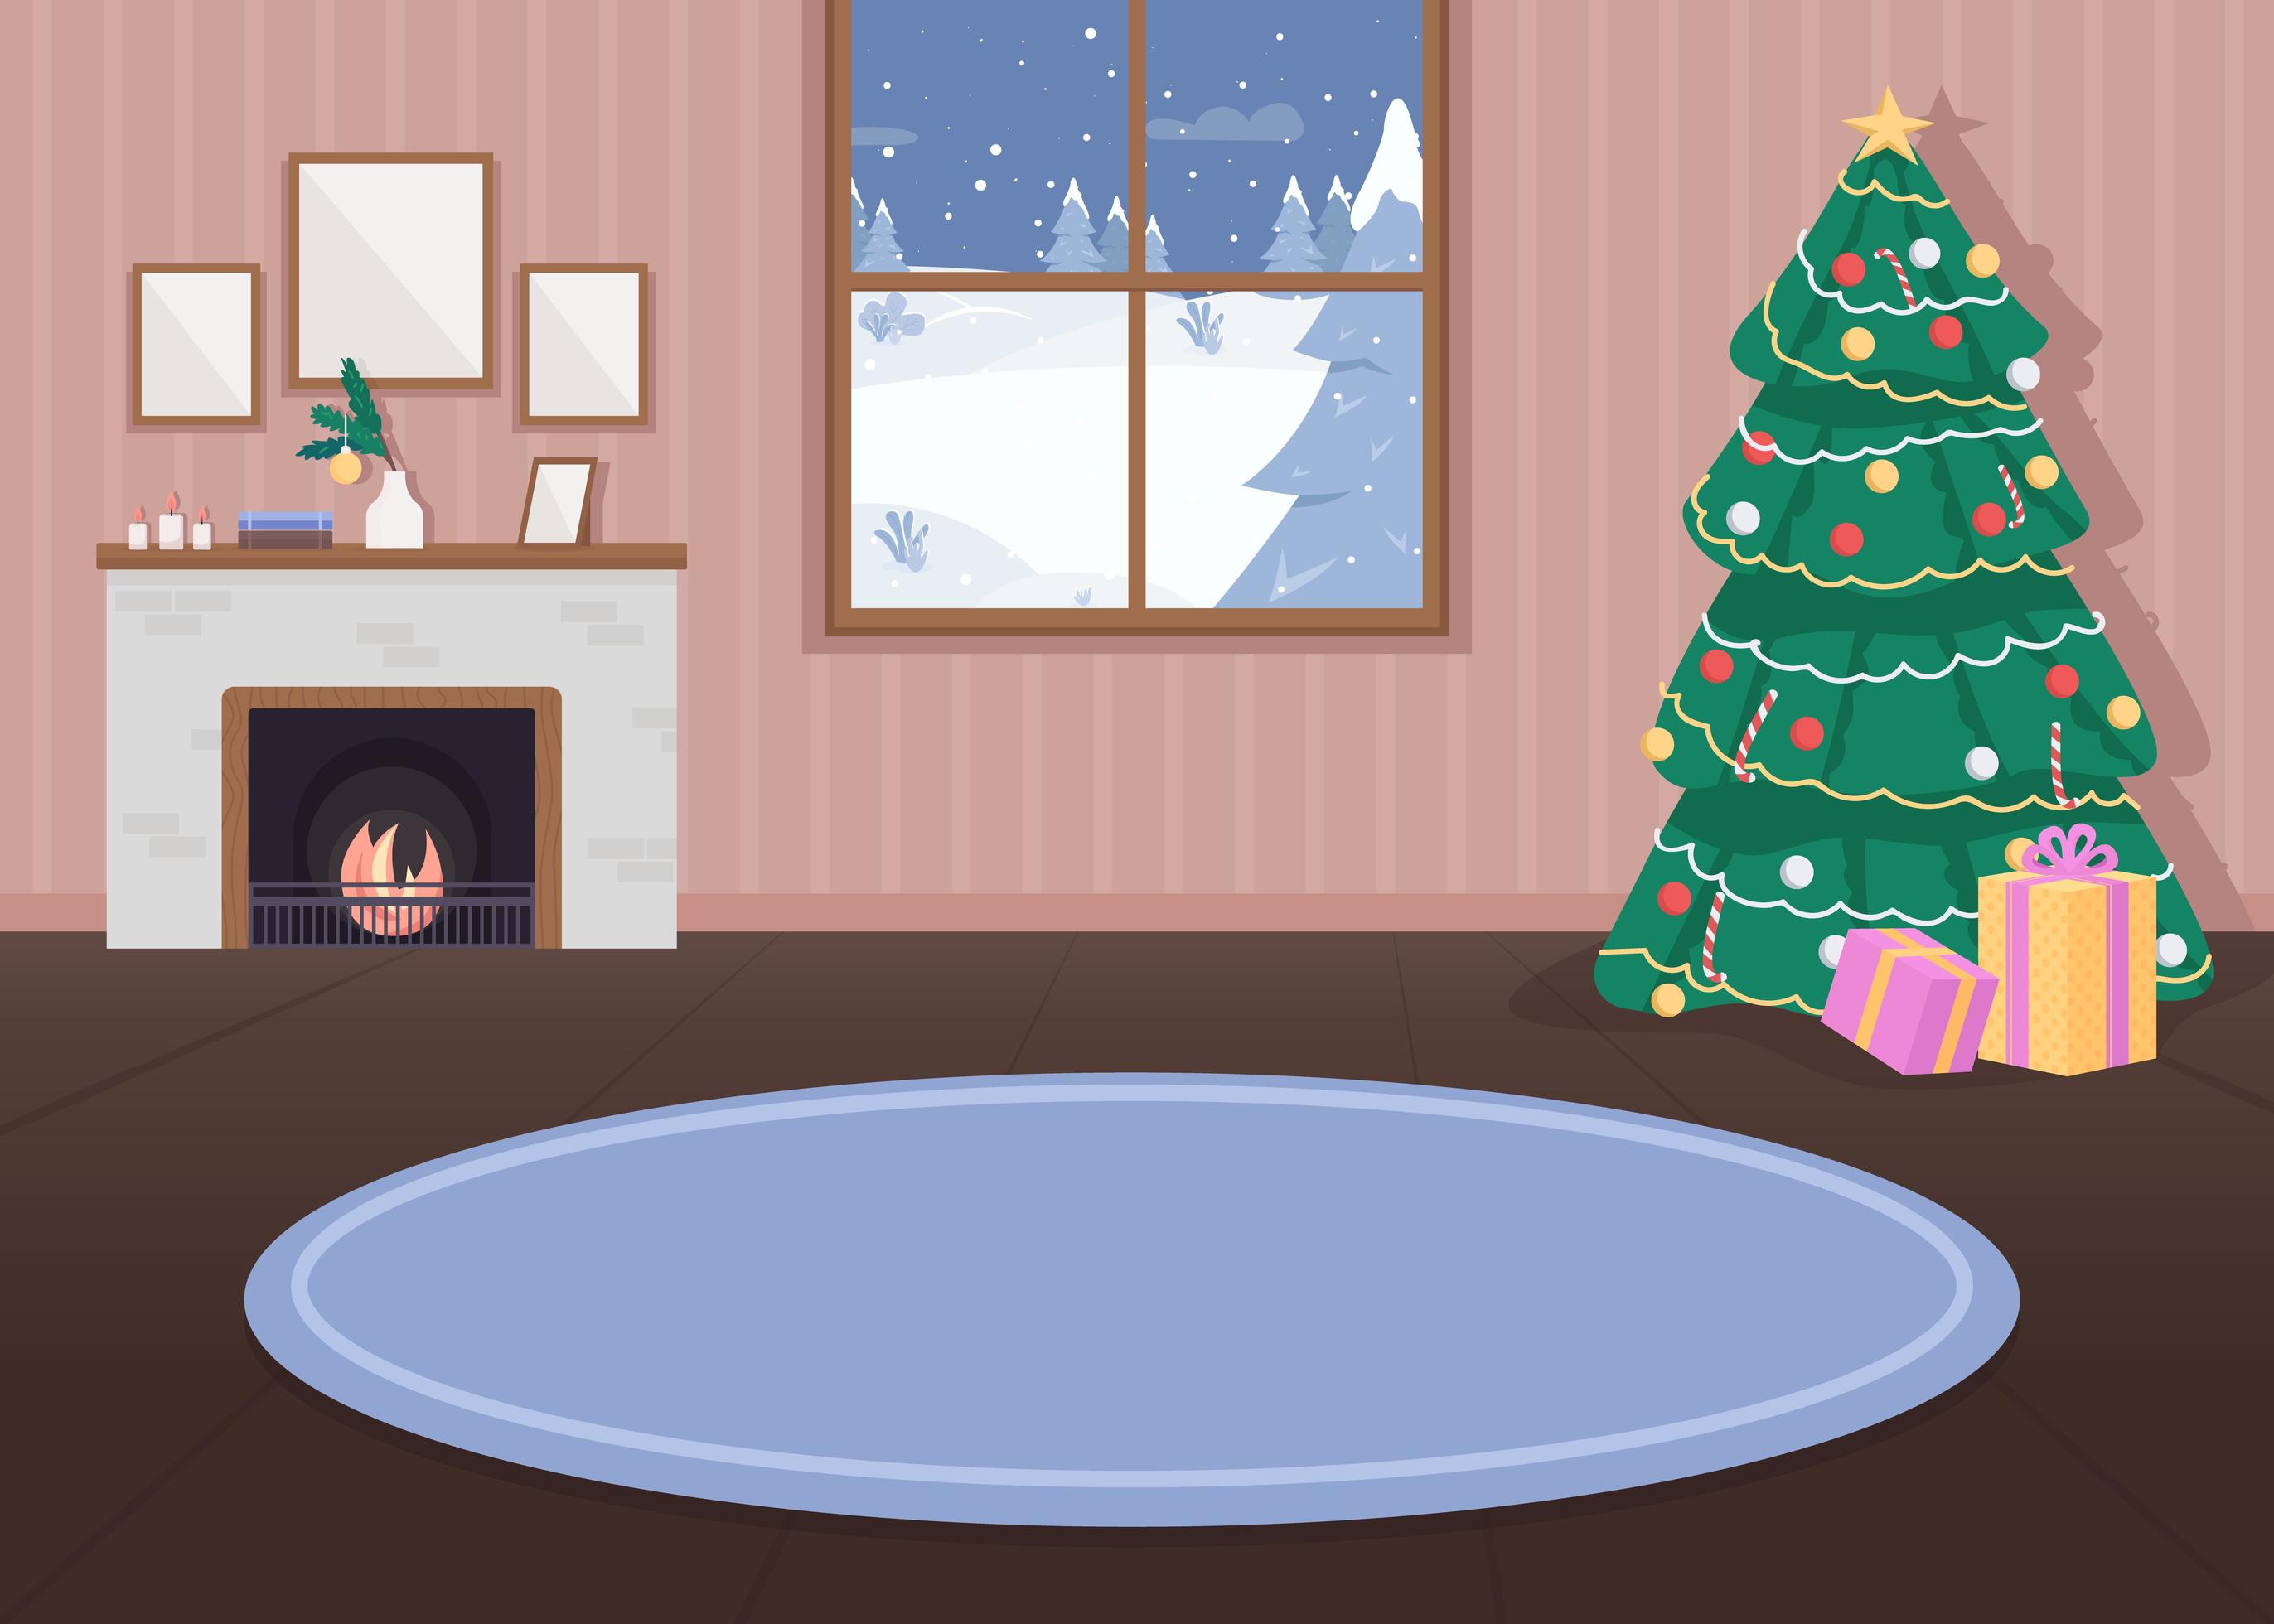 Christmas decorated house vector